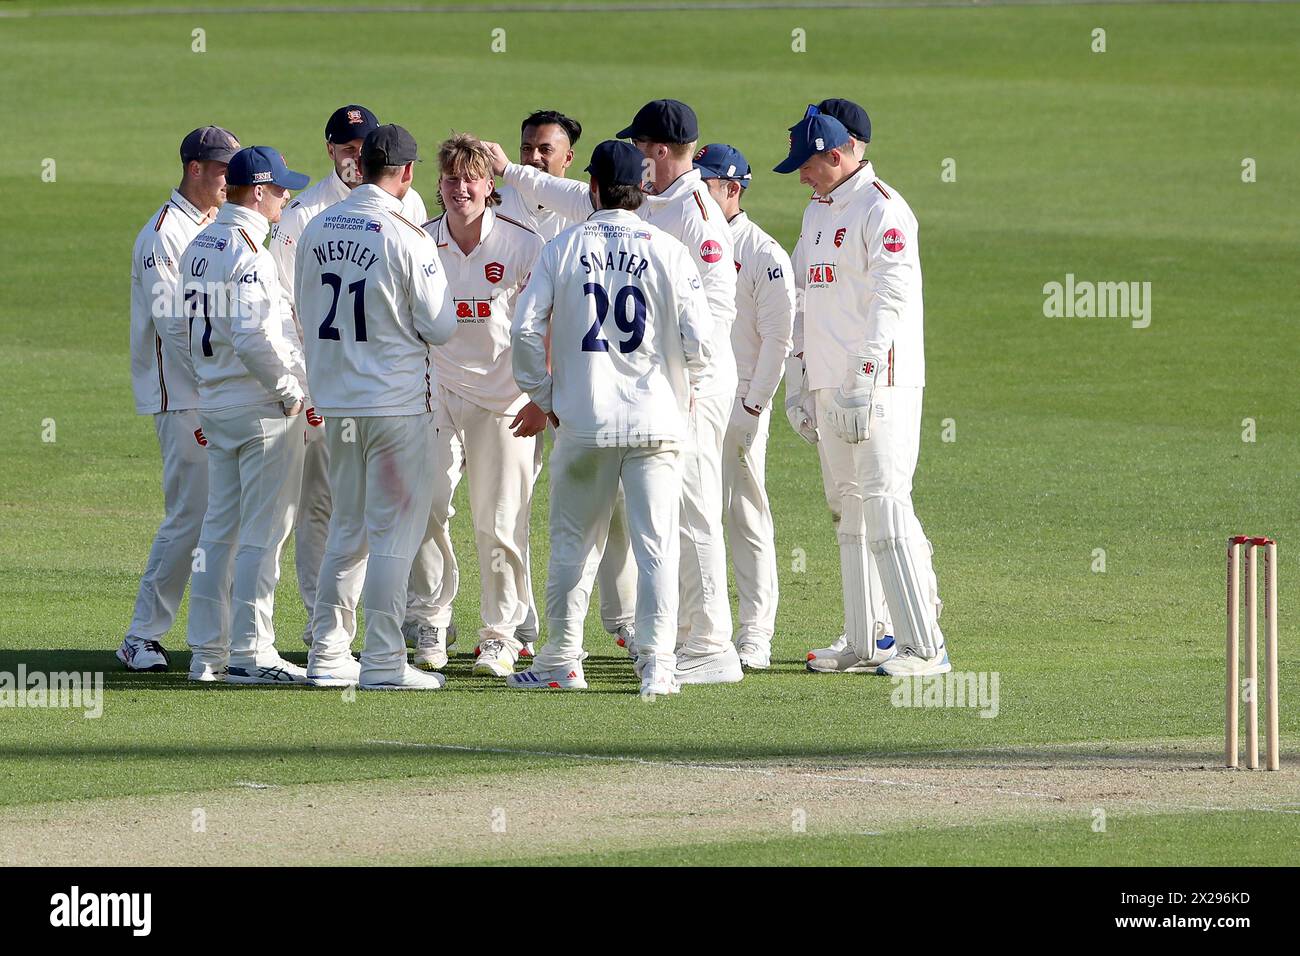 Noah Thain of Essex celebrates with his team mates after taking the wicket of Tom Bailey during Essex CCC vs Lancashire CCC, Vitality County Champions Stock Photo